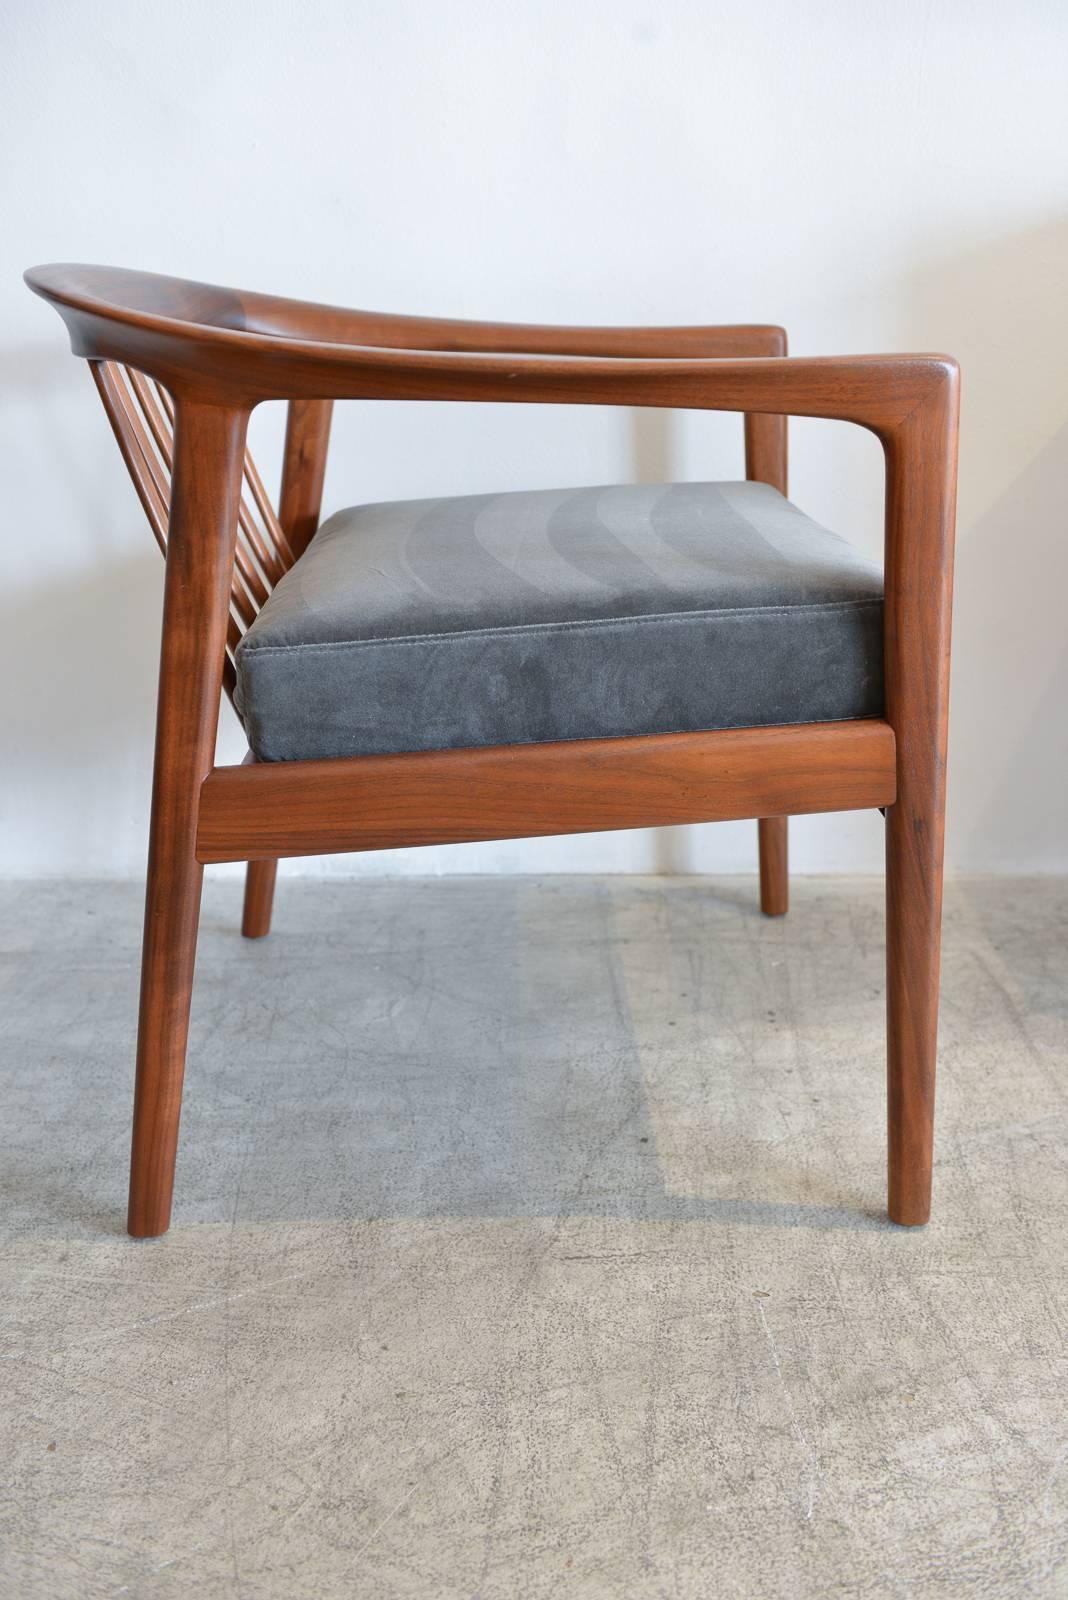 Beautiful single side chair by Folke Ohlsson for DUX, Sweden. Perfect side or accent chair to complete your set, or would work very nicely as a desk chair or corner chair in a guest room. Professionally restored, showroom condition with new grey